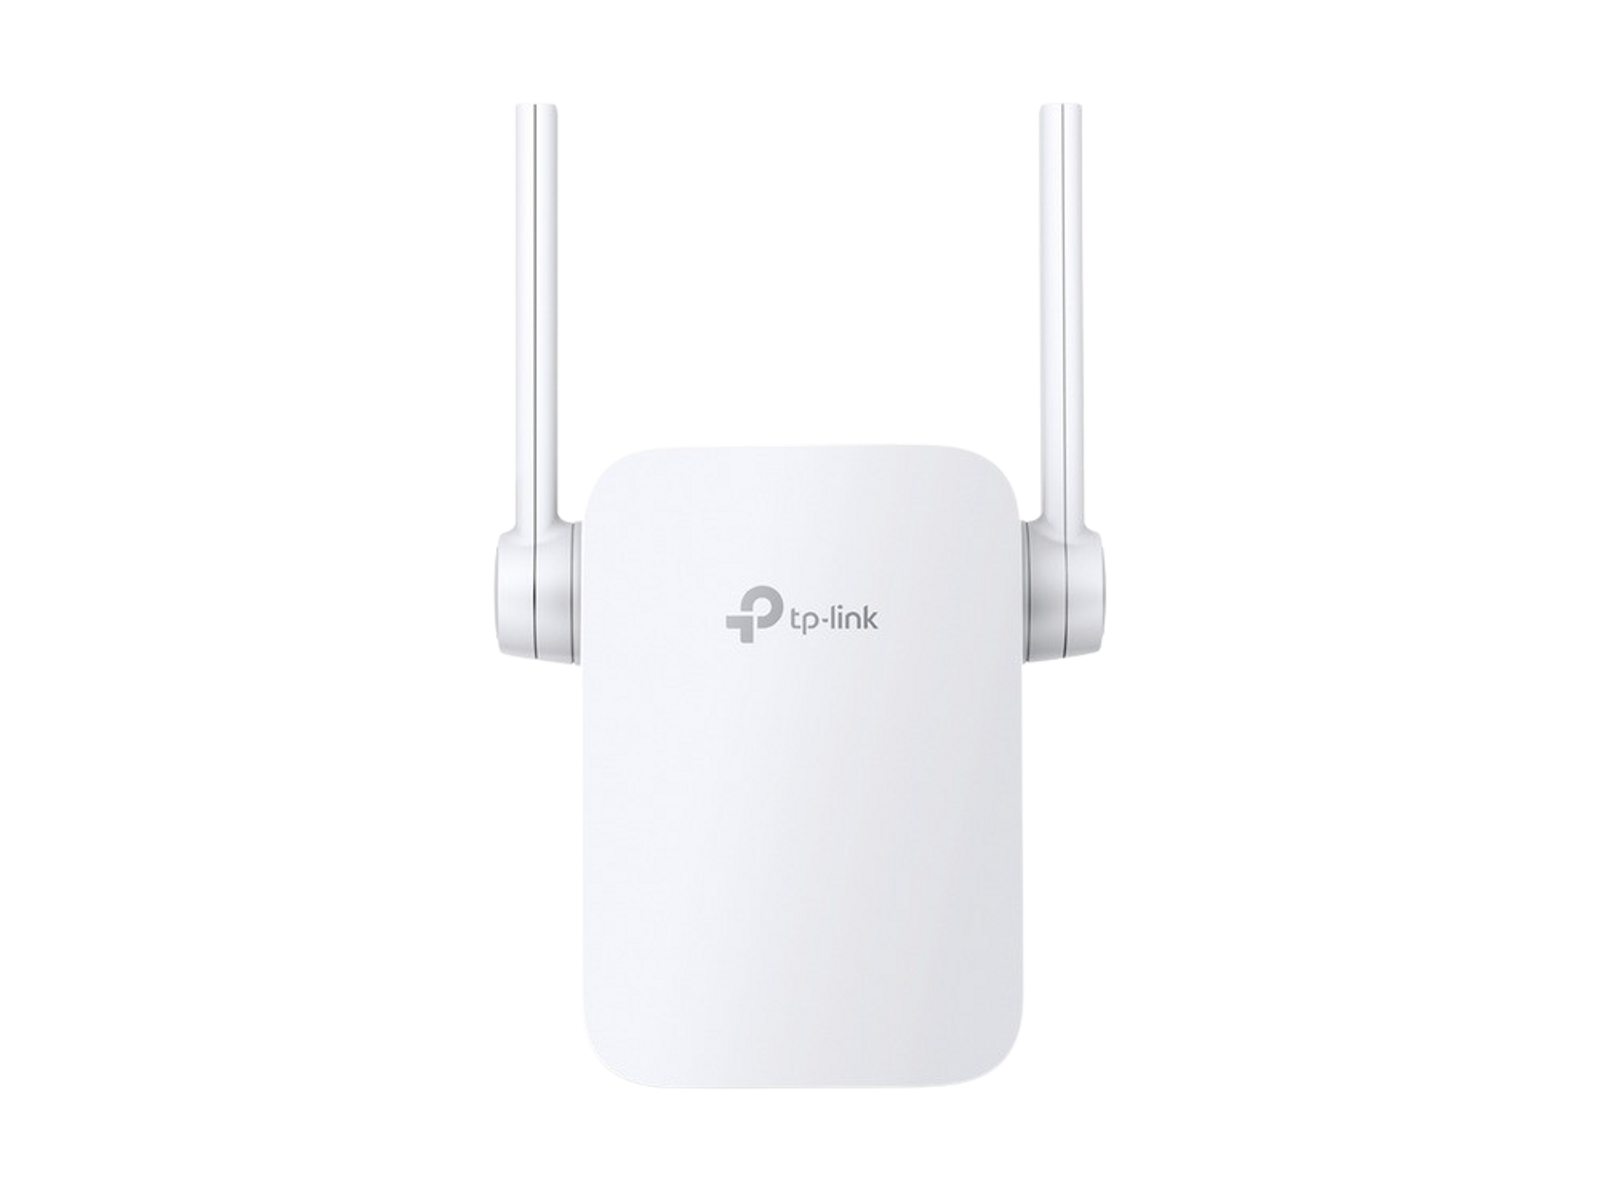 AC1200 TP-LINK DUALBAND WLAN WLAN RE305 Repeater REPEATER